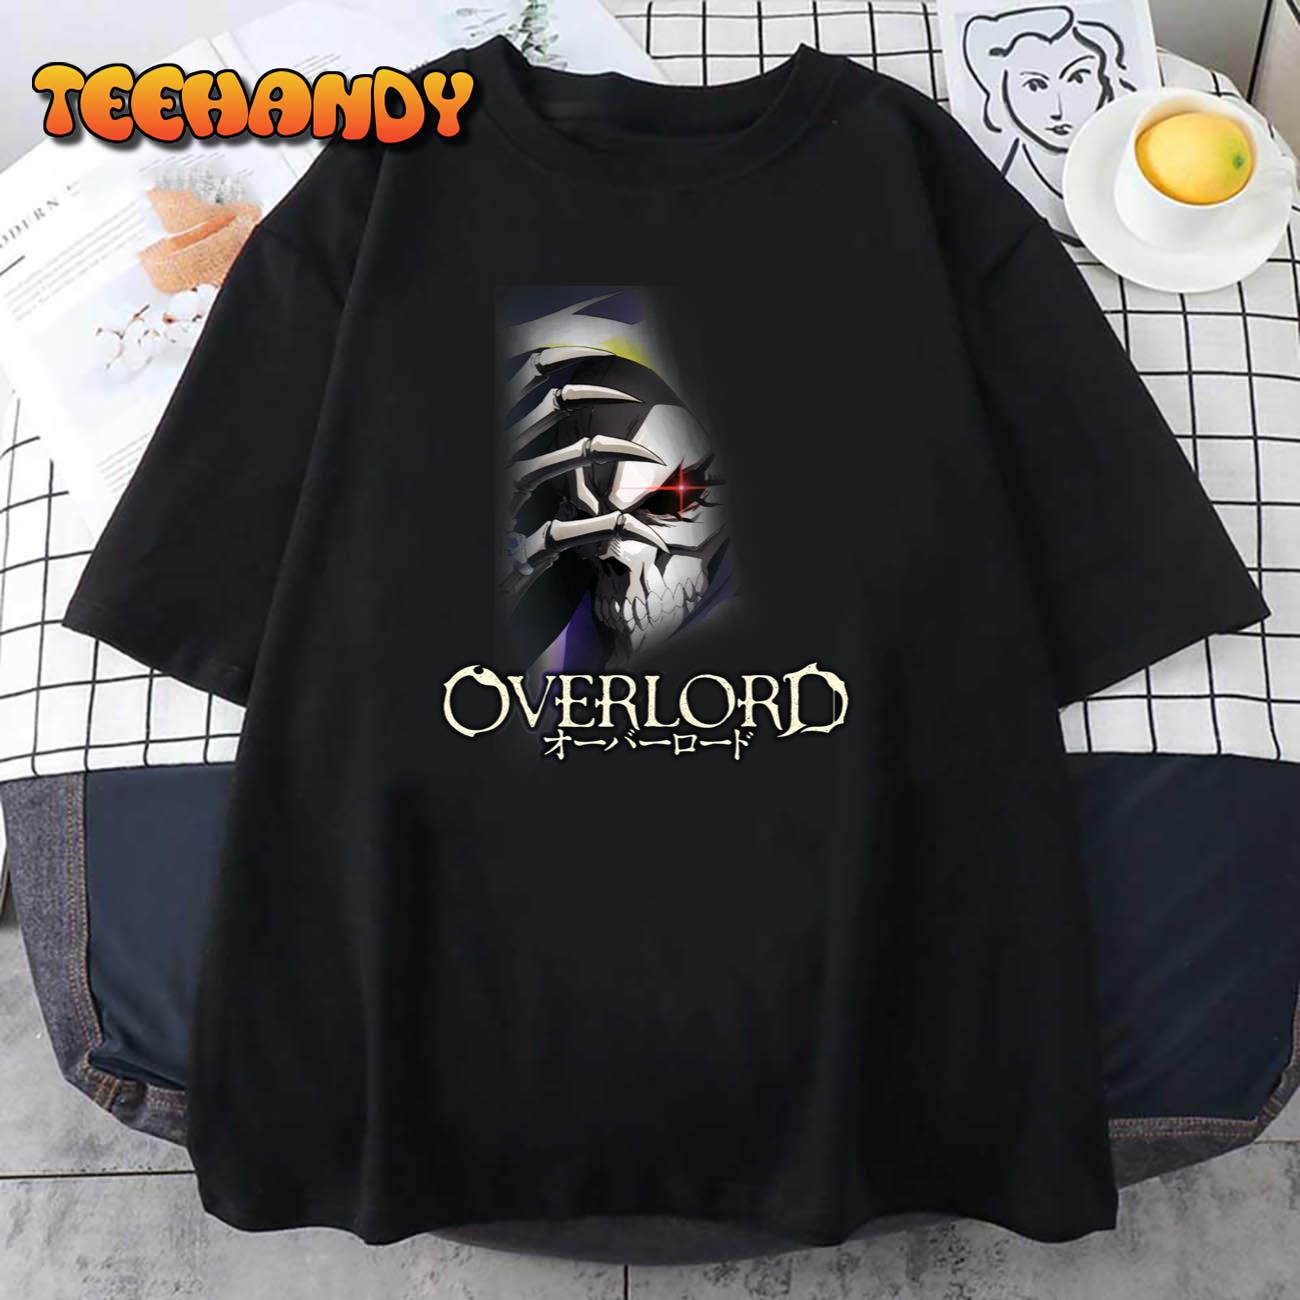 Overlord Ainz Ooal Gown Japanese Unisex T Shirt img2 C12